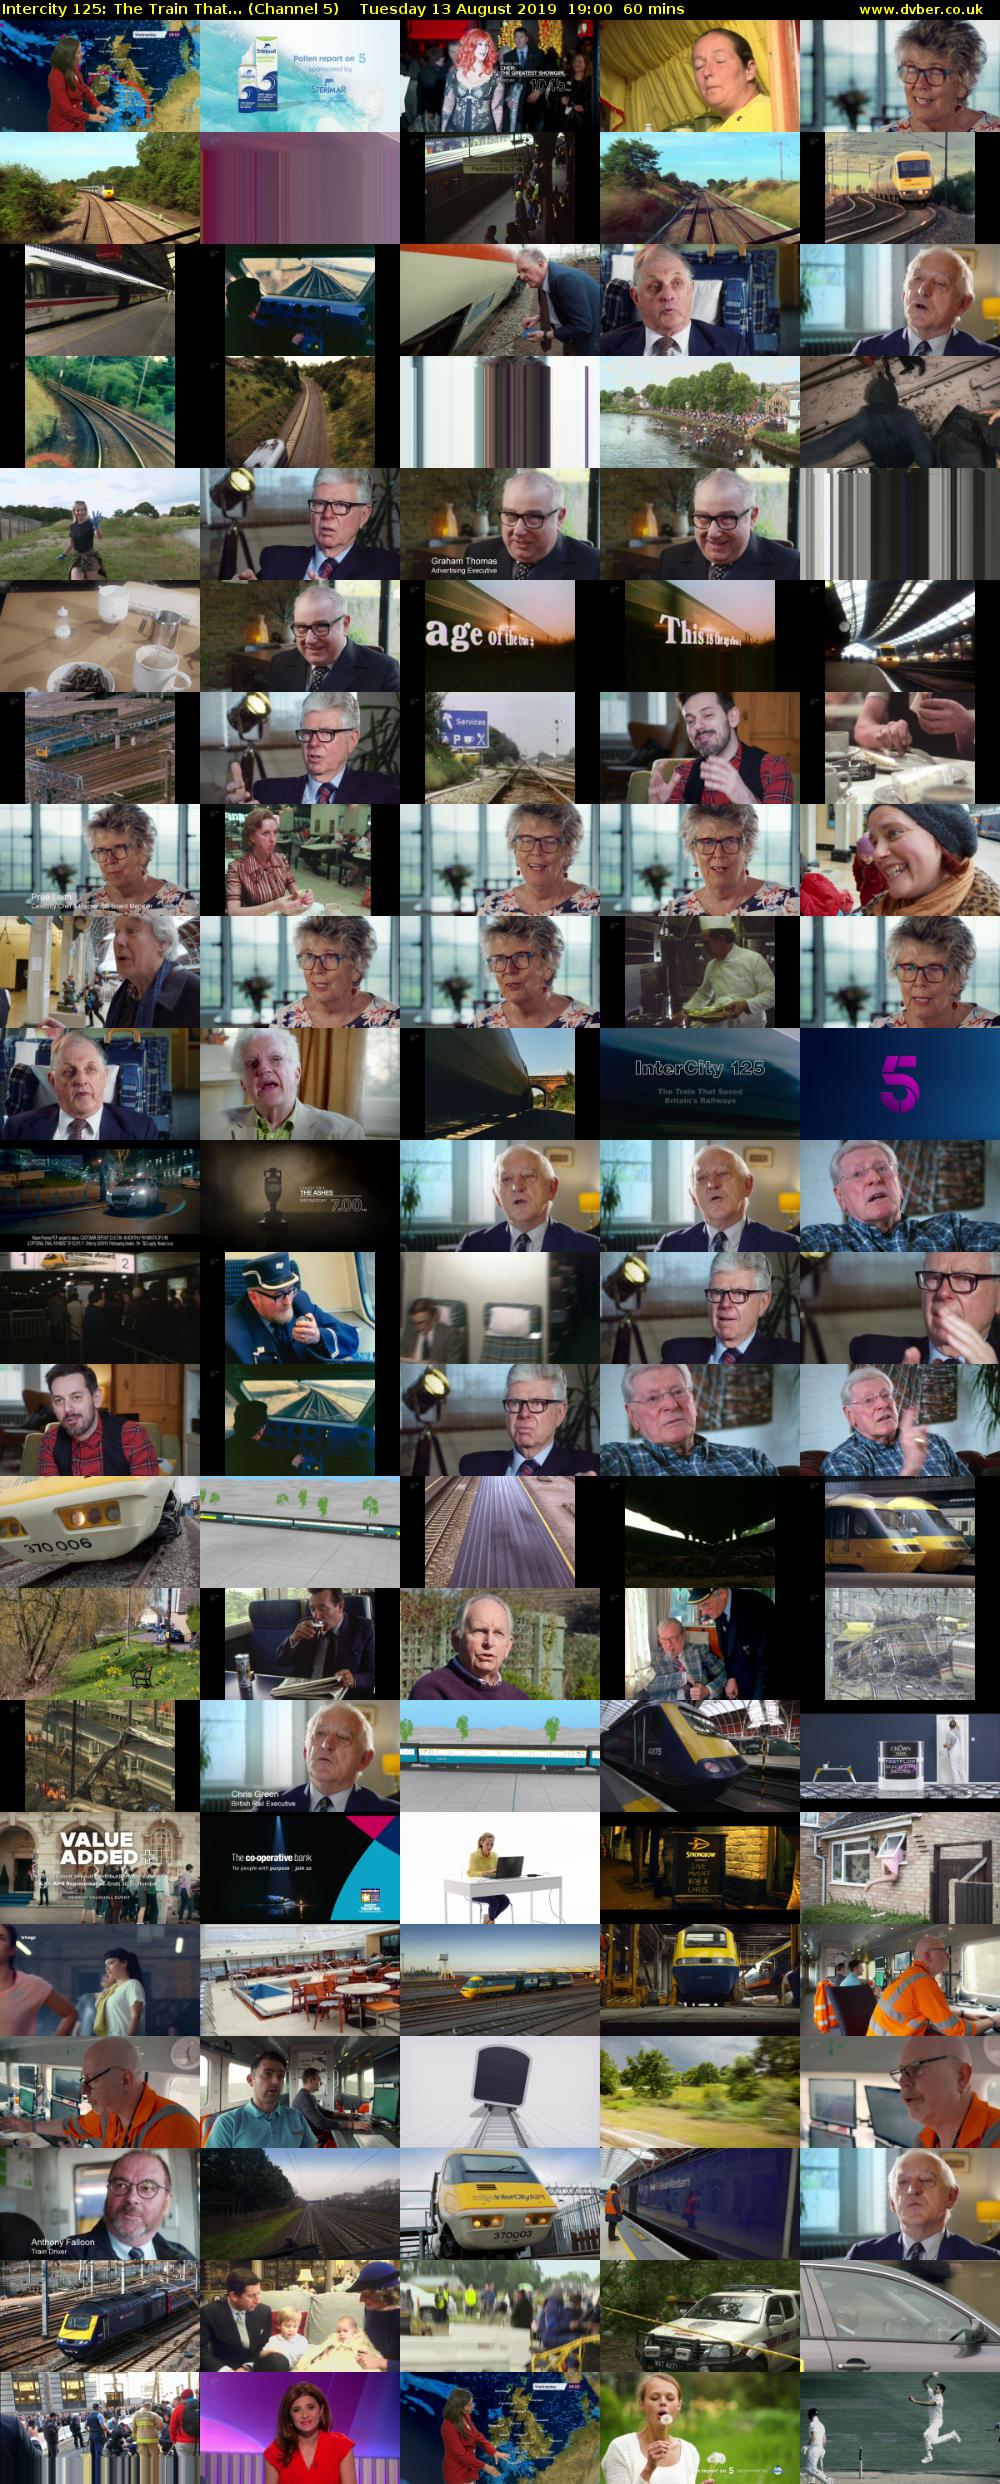 Intercity 125: The Train That... (Channel 5) Tuesday 13 August 2019 19:00 - 20:00